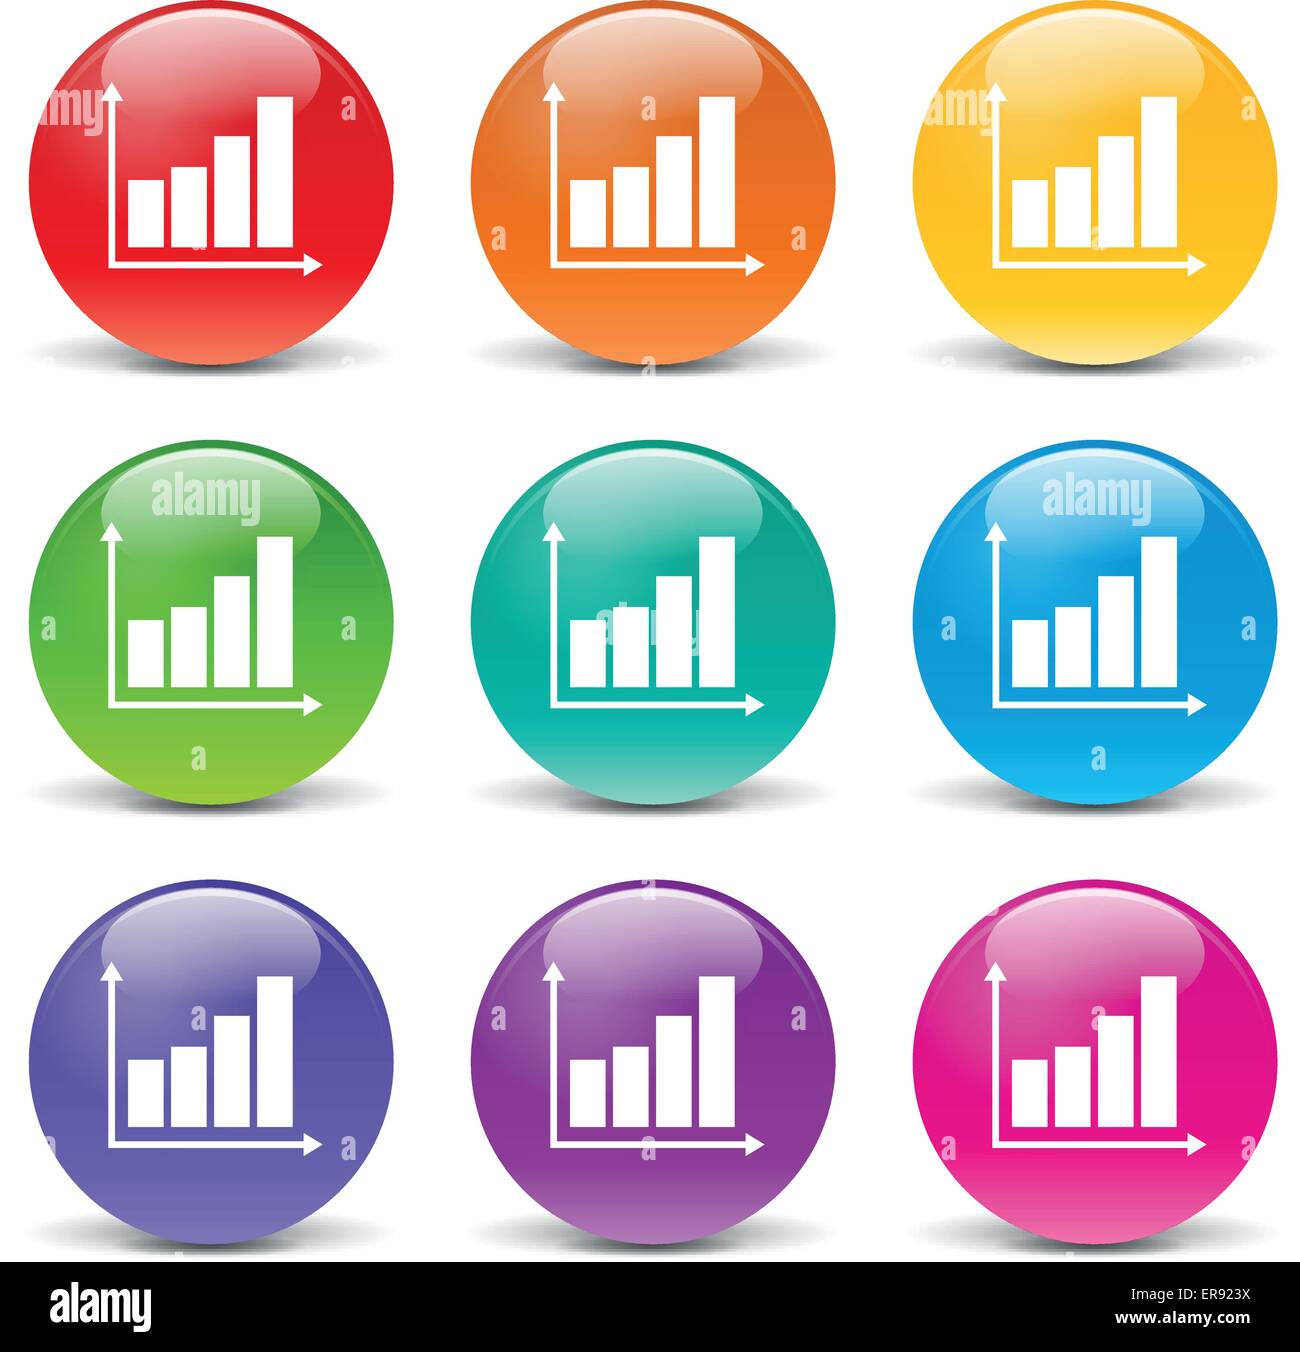 Vector illustration of graph set icons on white background Stock Vector